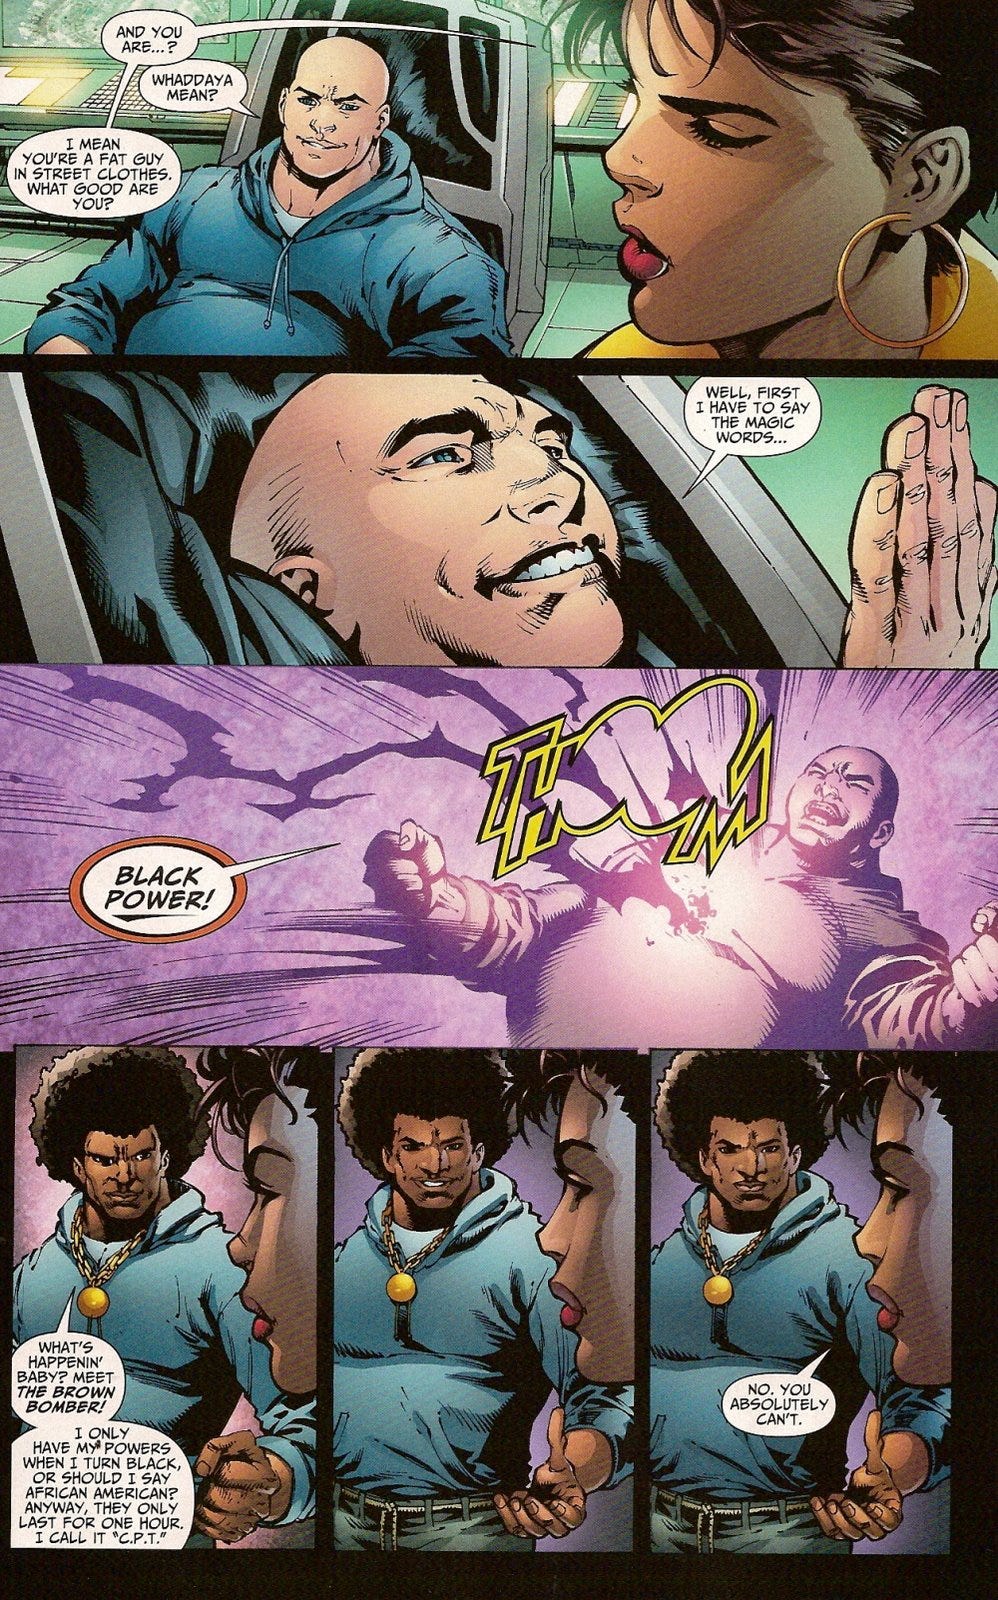 A Couple of Blerdz 24 / Why are most black heroes electric?